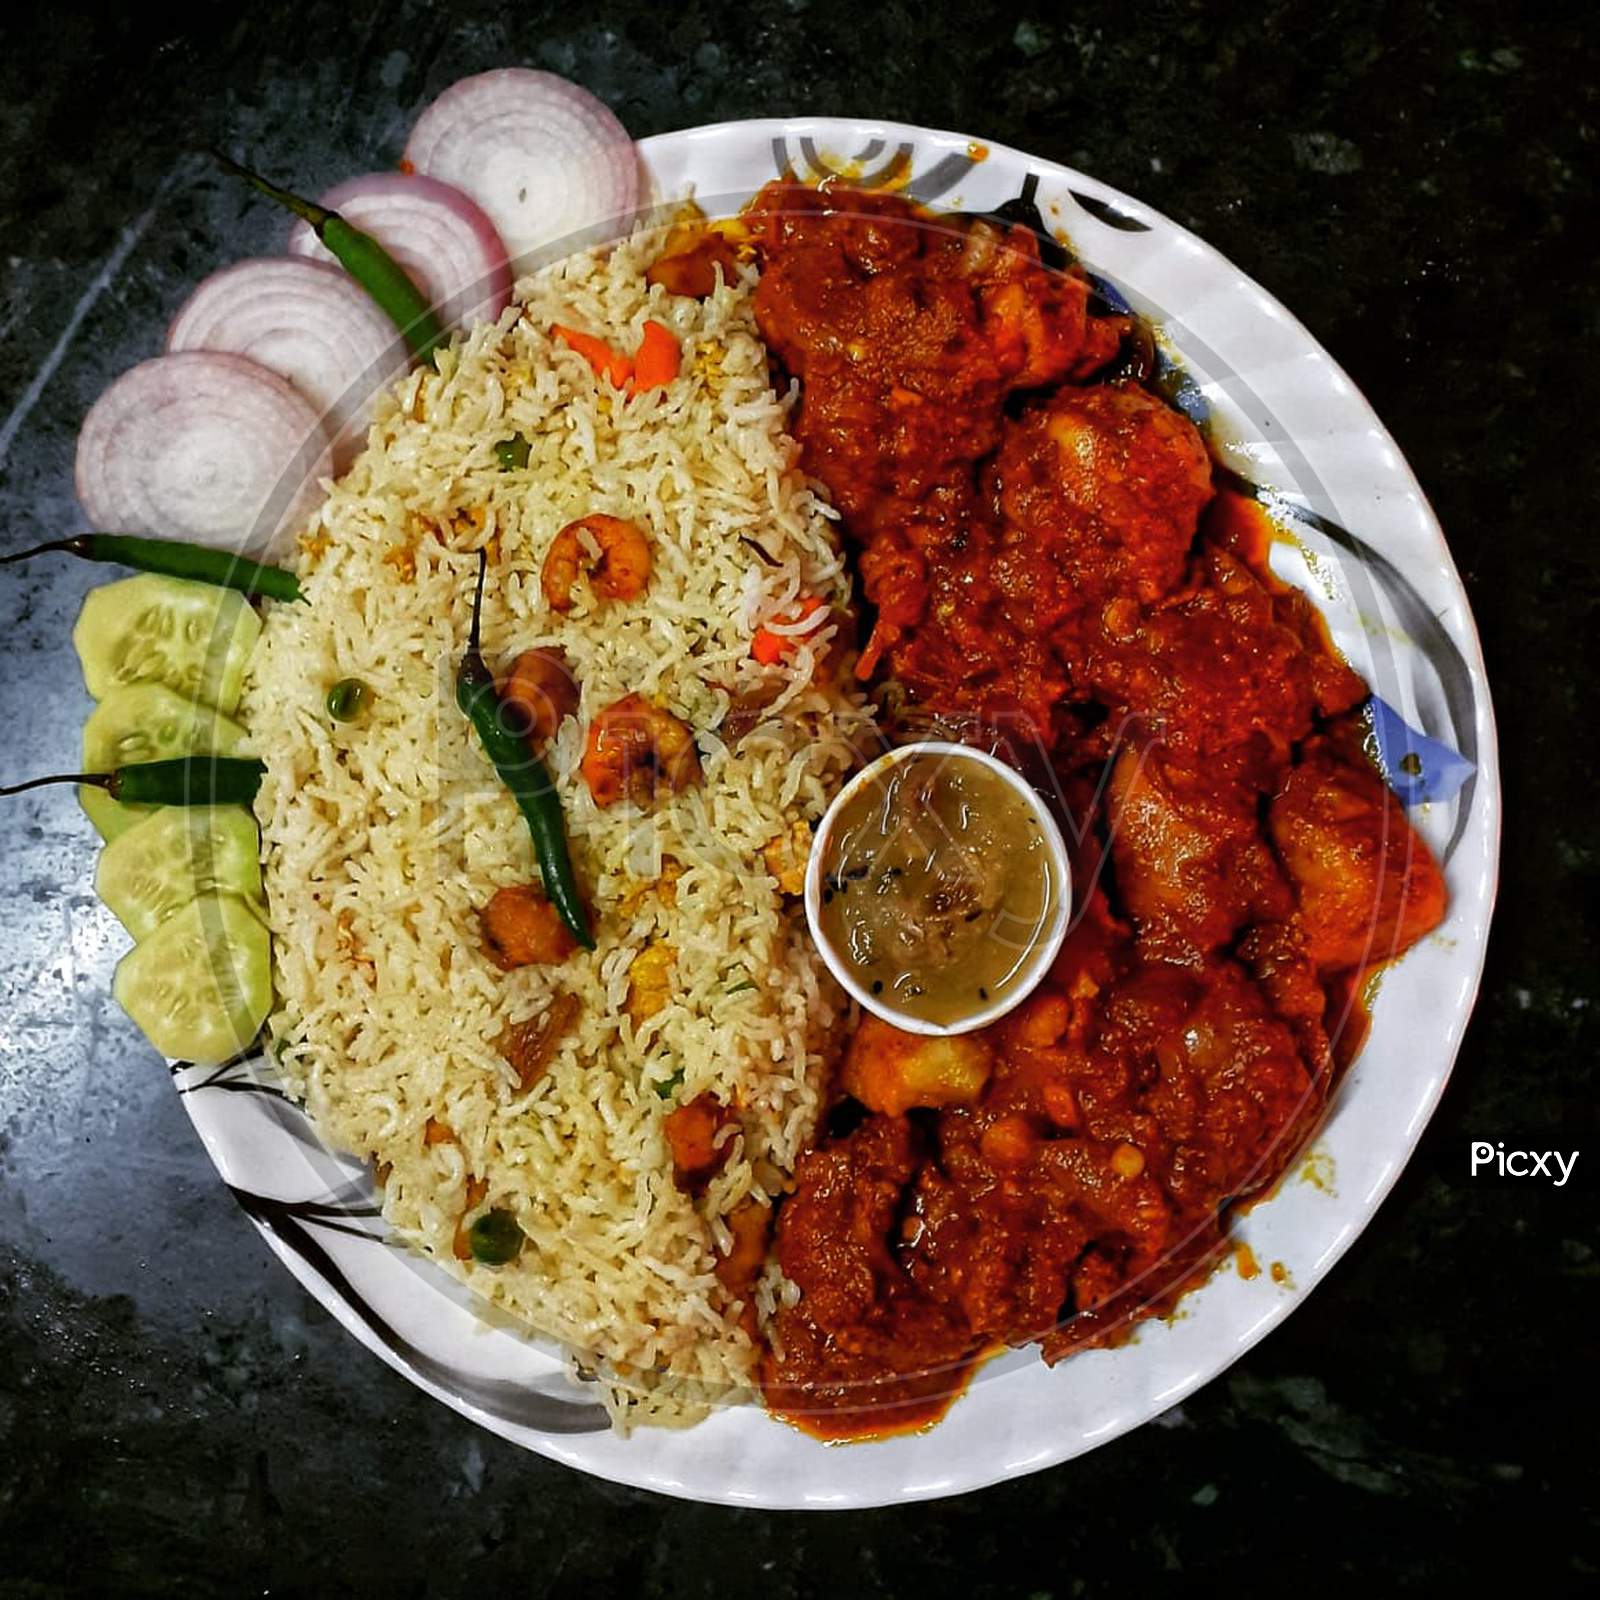 Mixed fried rice with spicy chicken